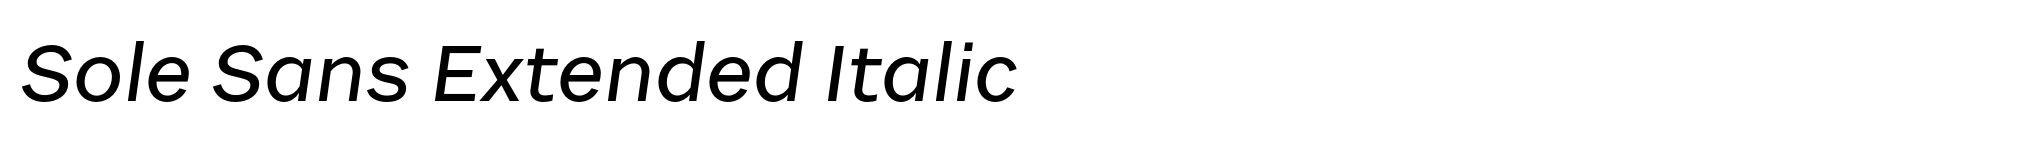 Sole Sans Extended Italic image